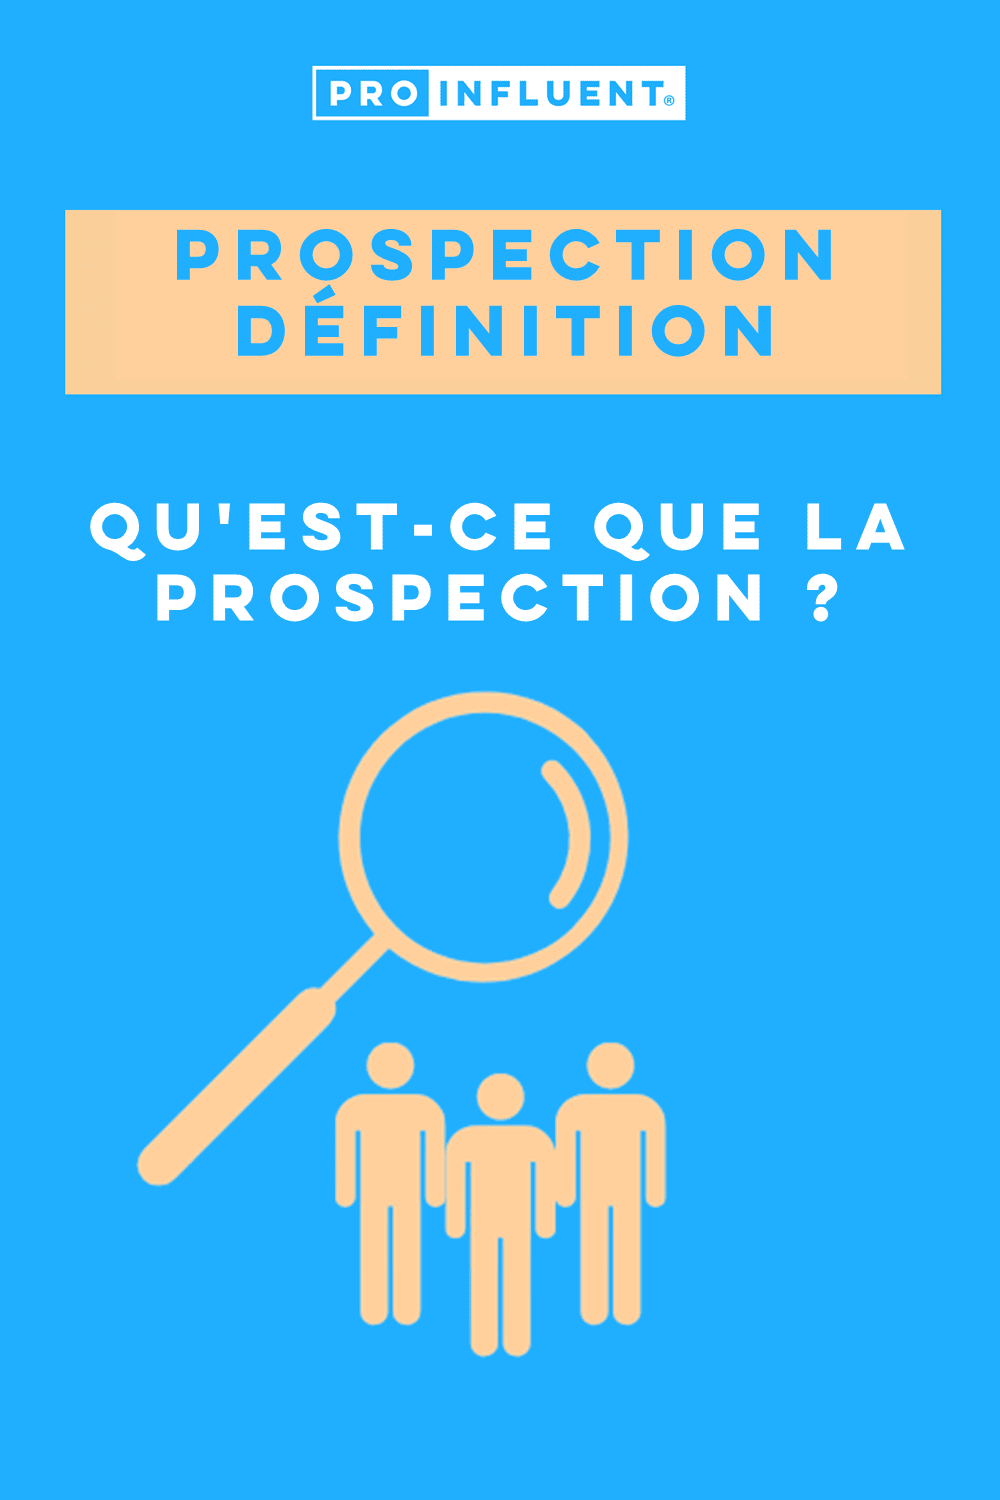 Prospecting def: what is prospecting? Definition and advice